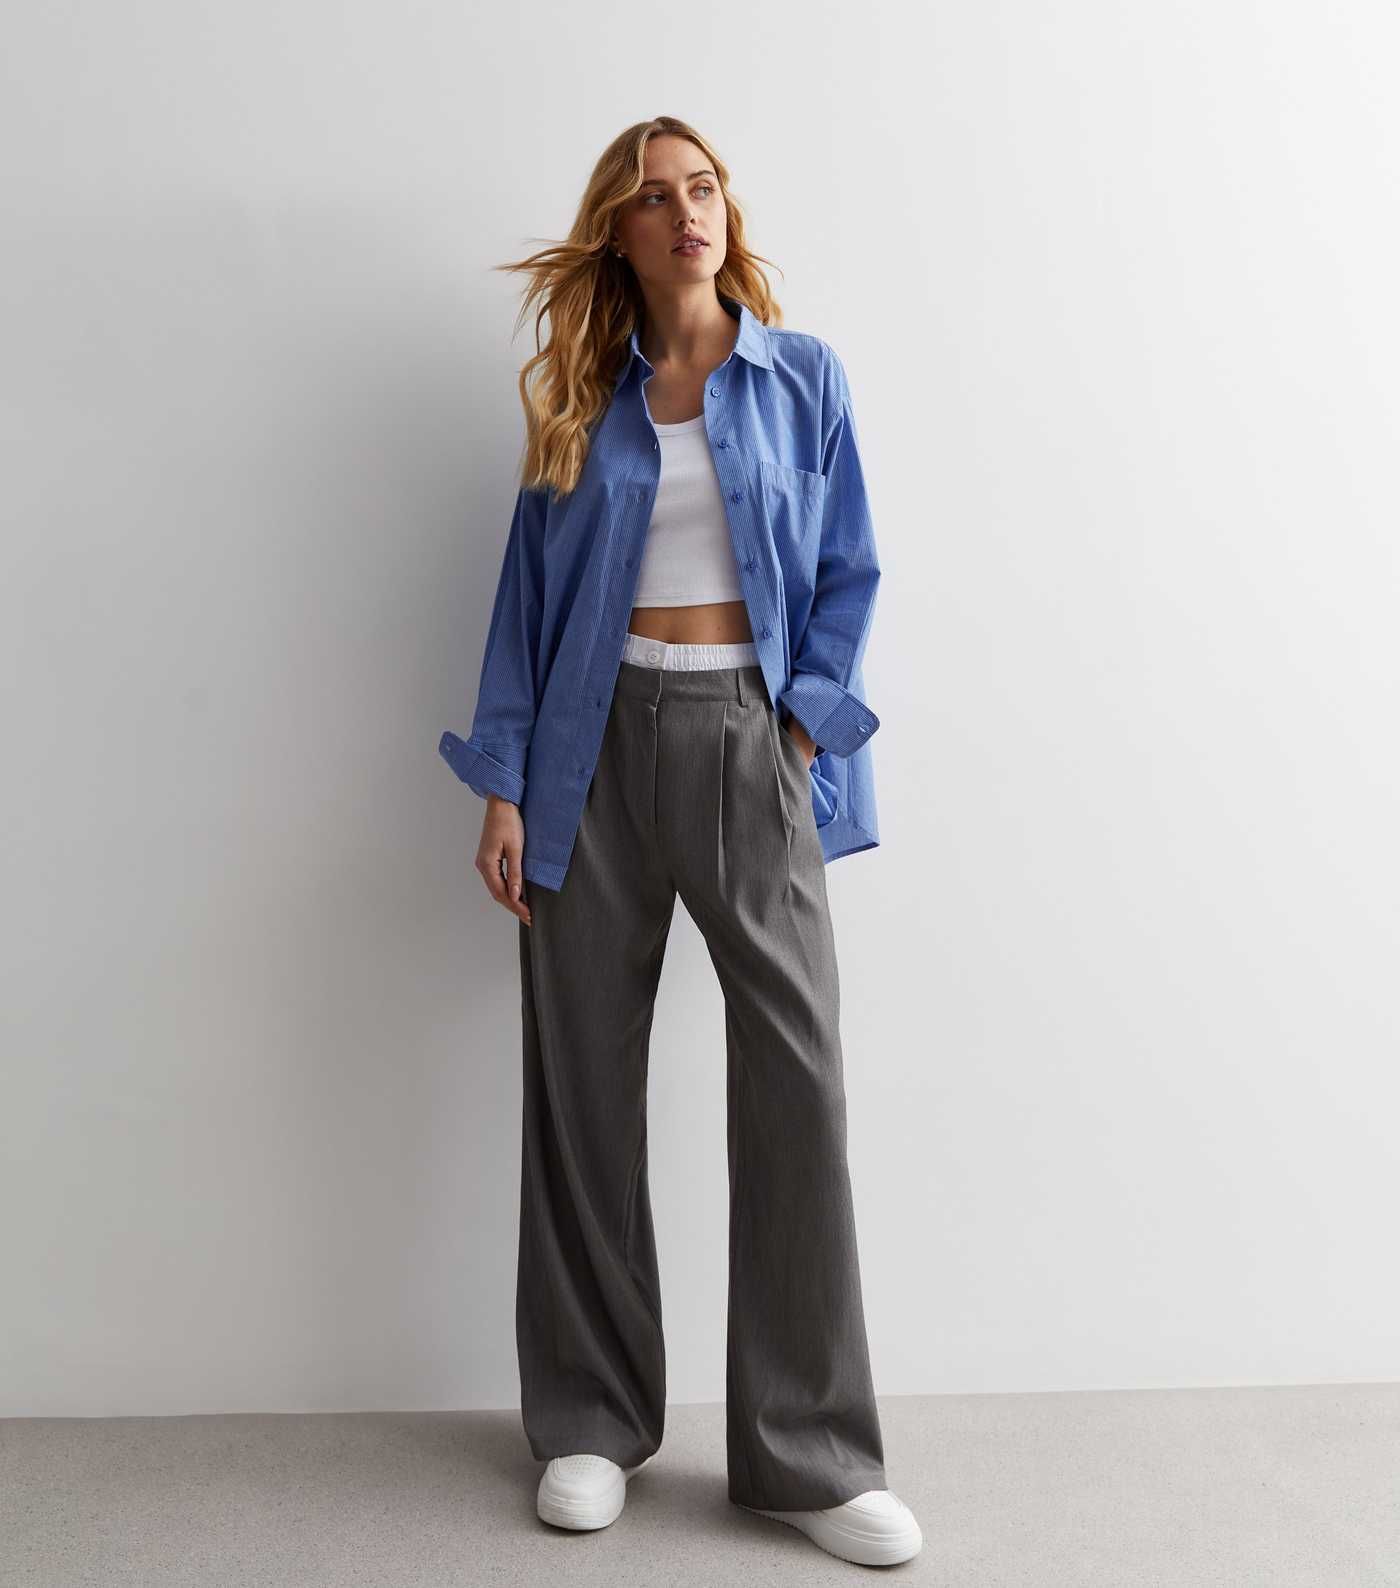 Grey Marl Boxer Detail Trousers
						
						Add to Saved Items
						Remove from Saved Items | New Look (UK)